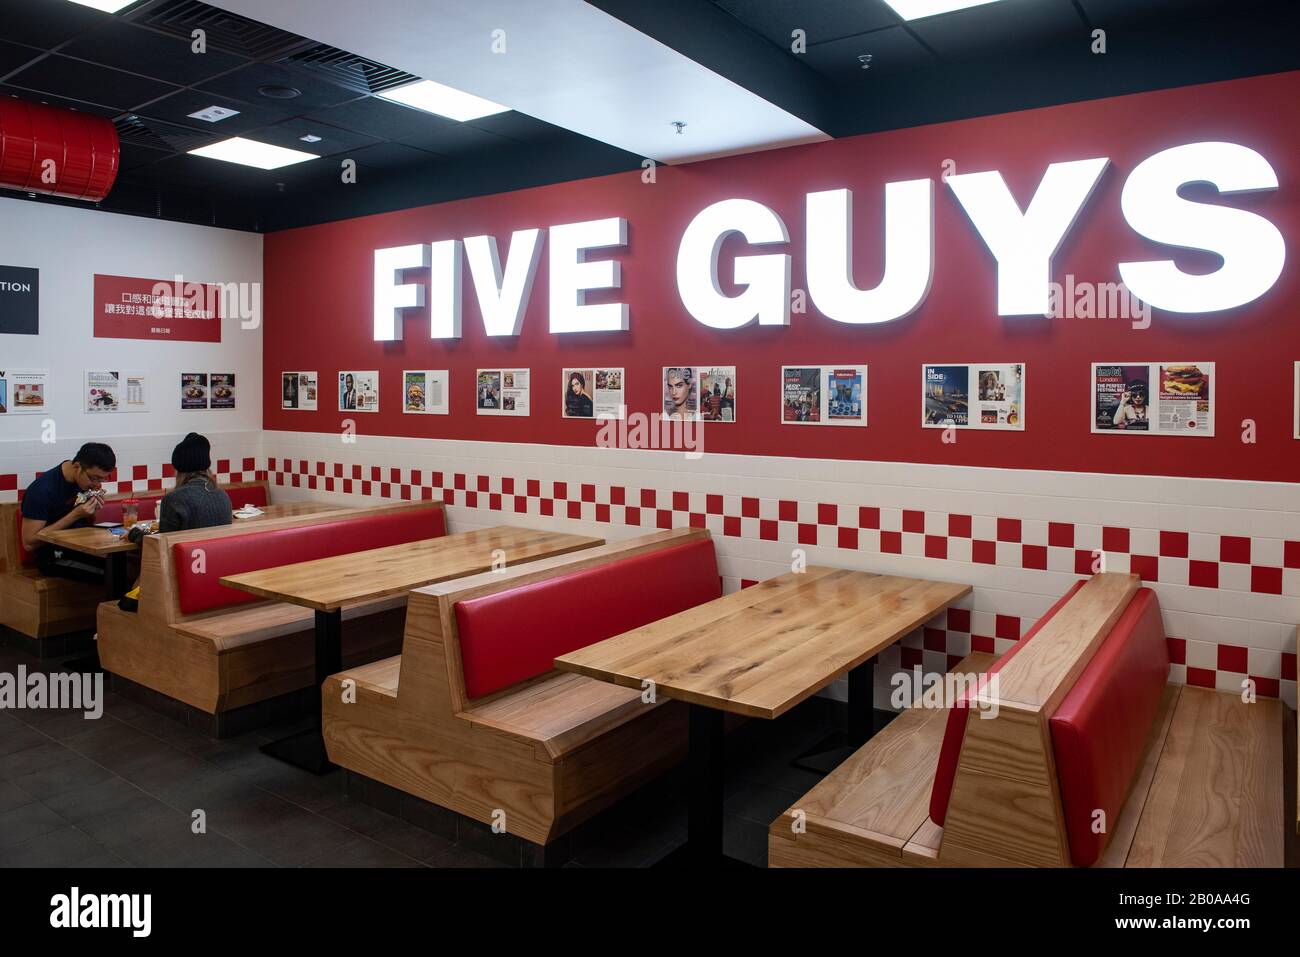 Customers eat at the American fast casual restaurant chain Five Guys in ...